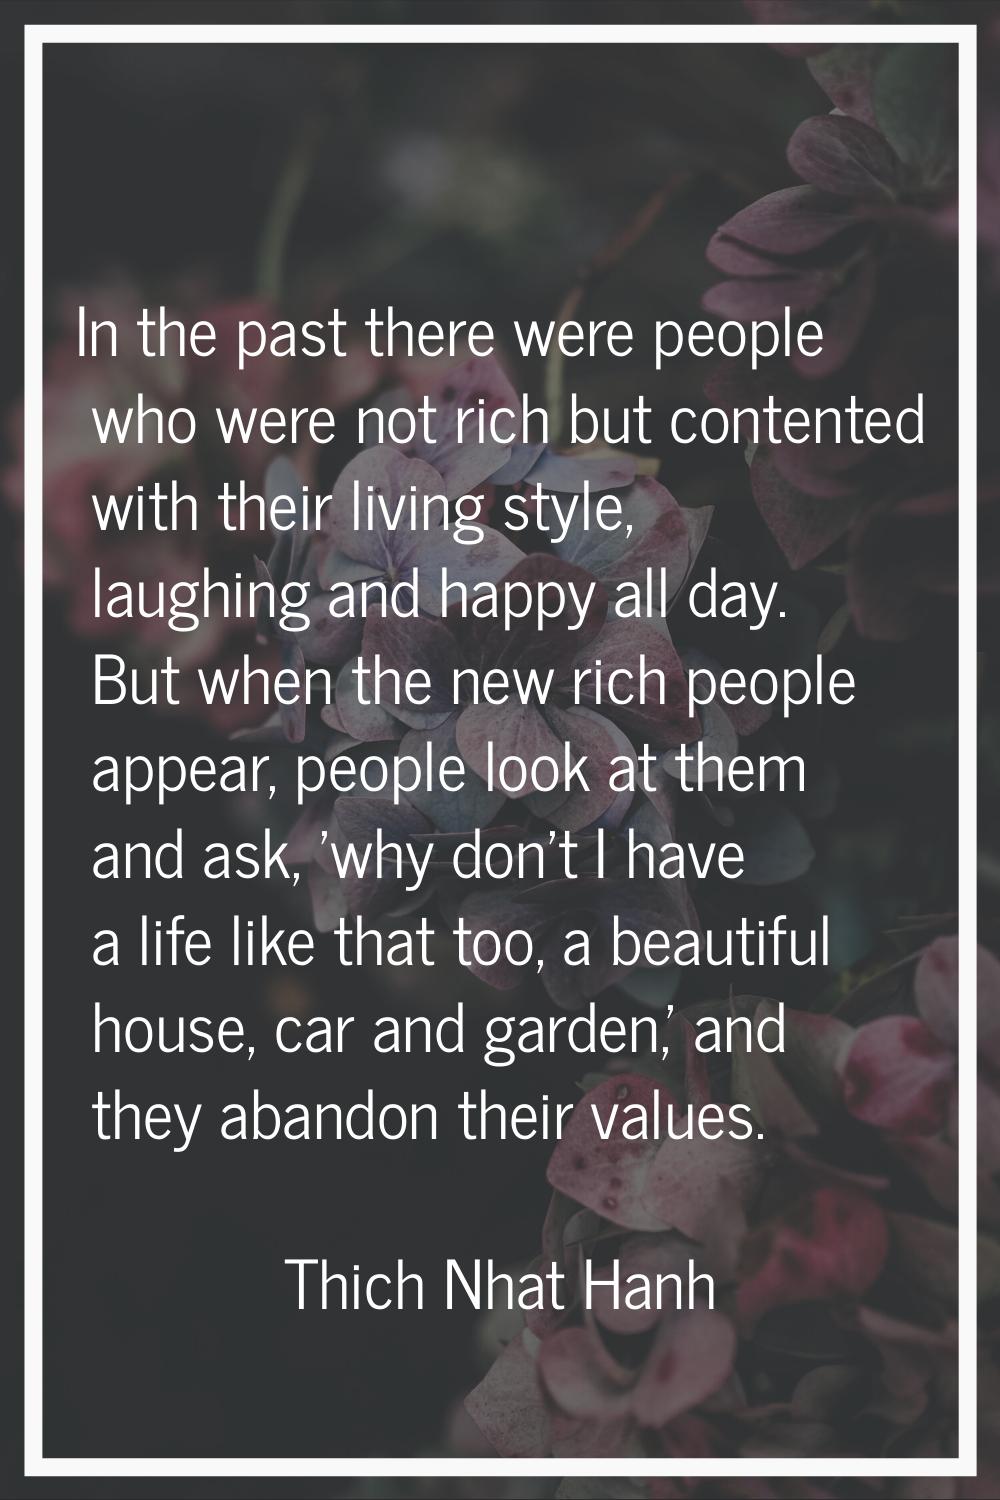 In the past there were people who were not rich but contented with their living style, laughing and